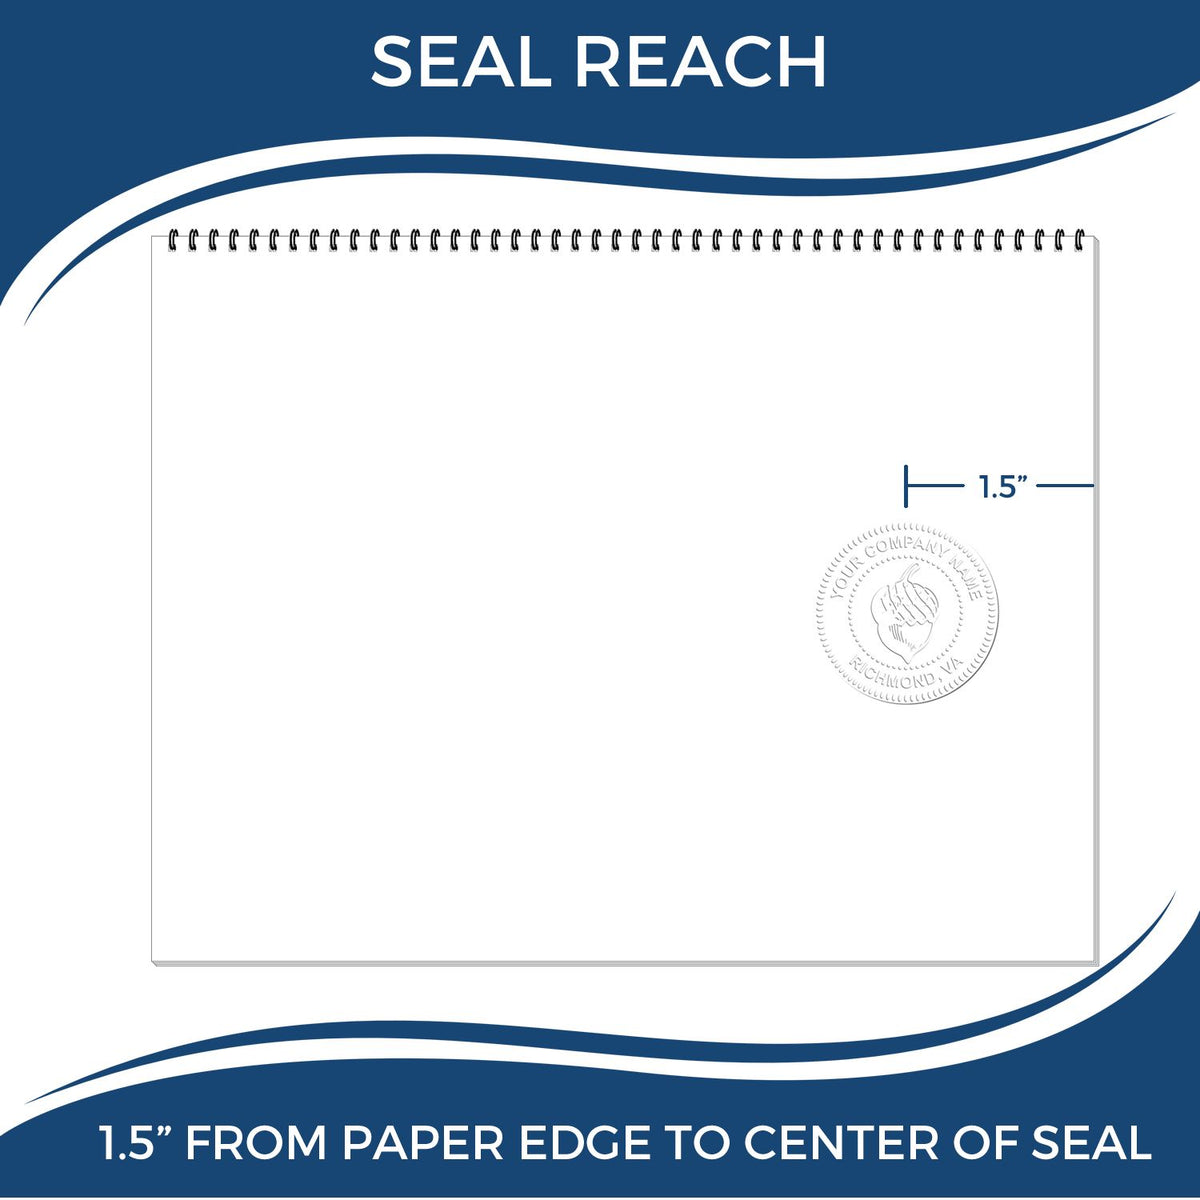 An infographic showing the seal reach which is represented by a ruler and a miniature seal image of the Gift Utah Engineer Seal